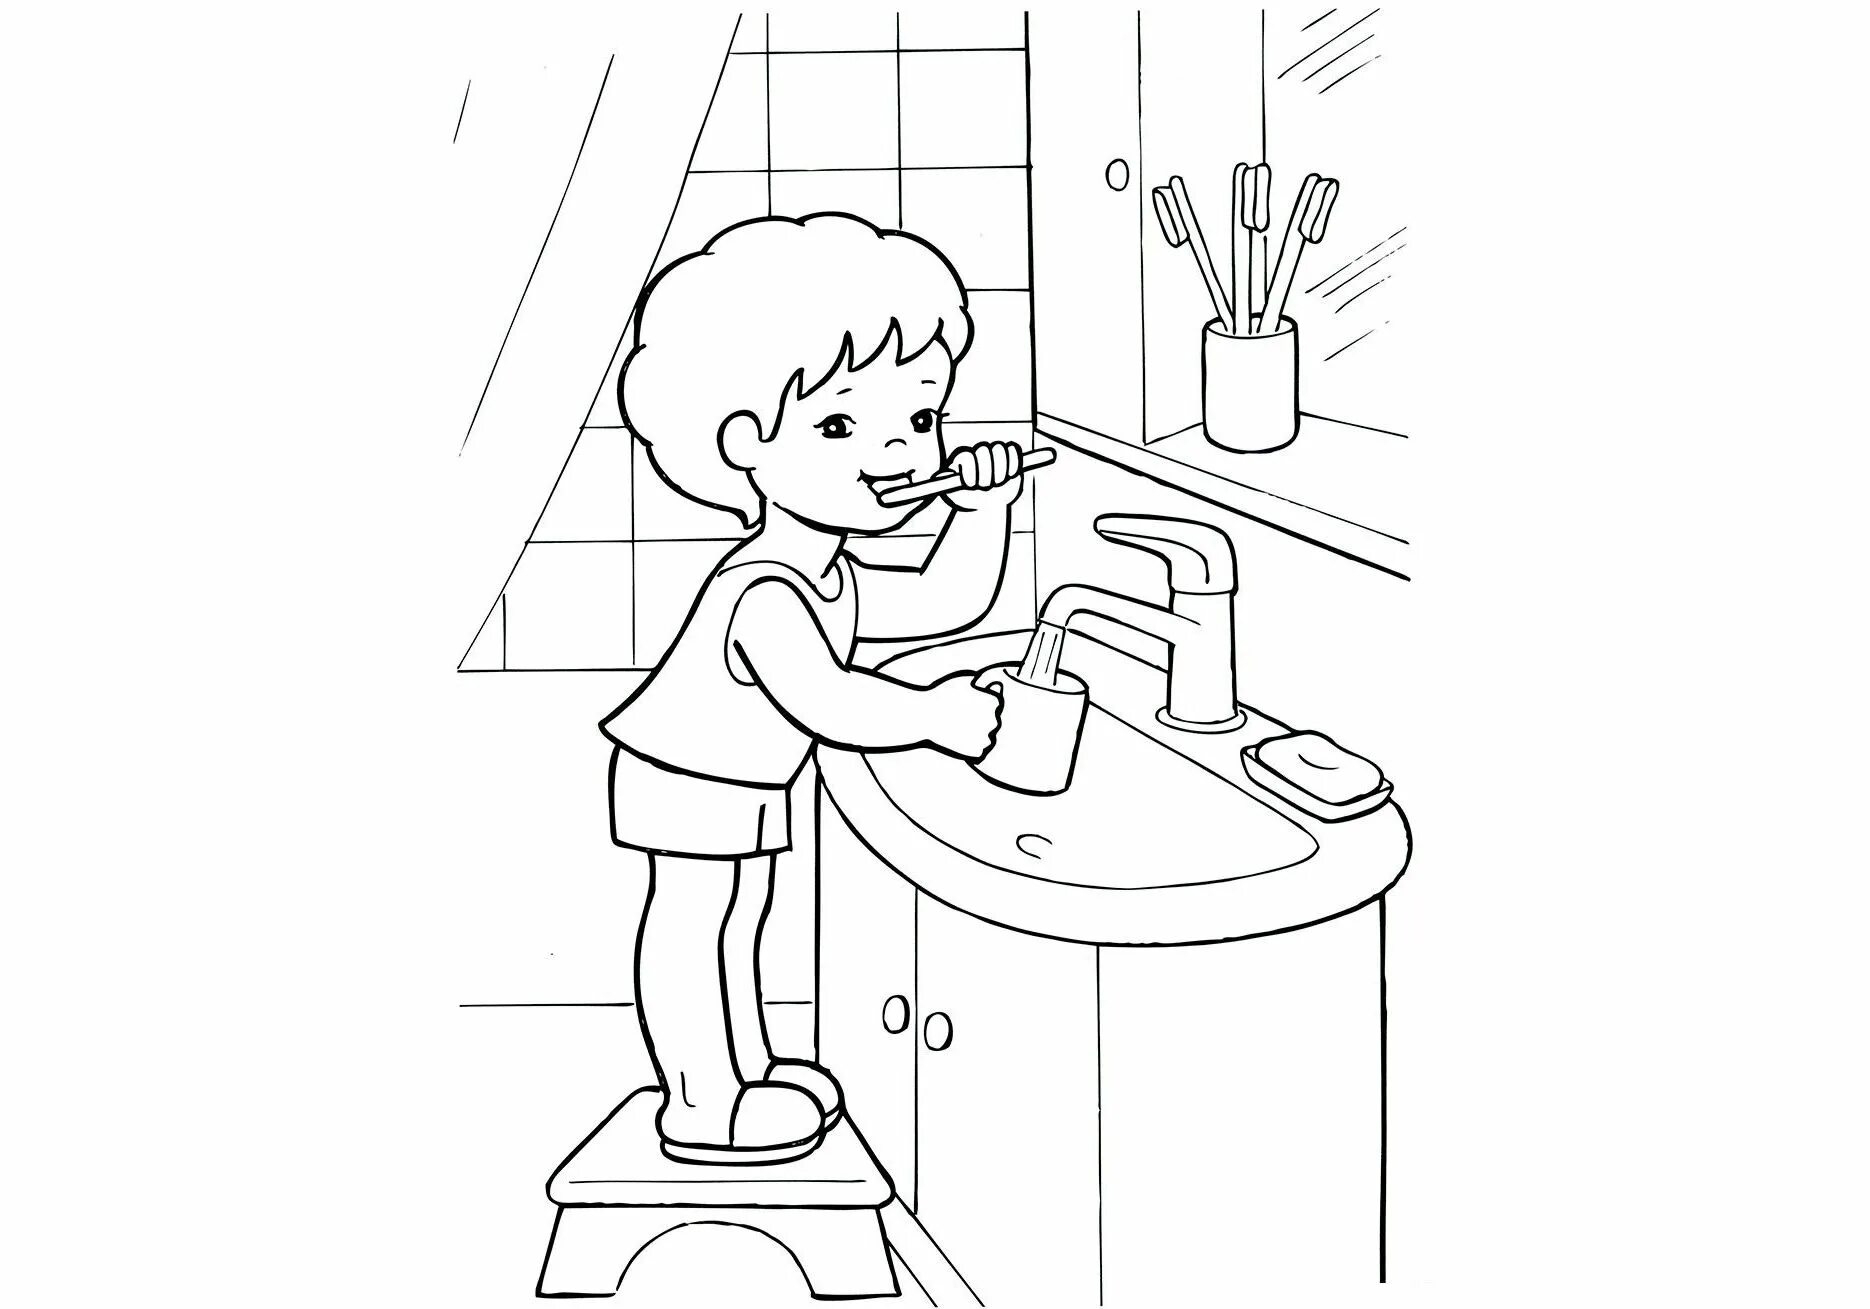 Colorful hygiene coloring page for new students